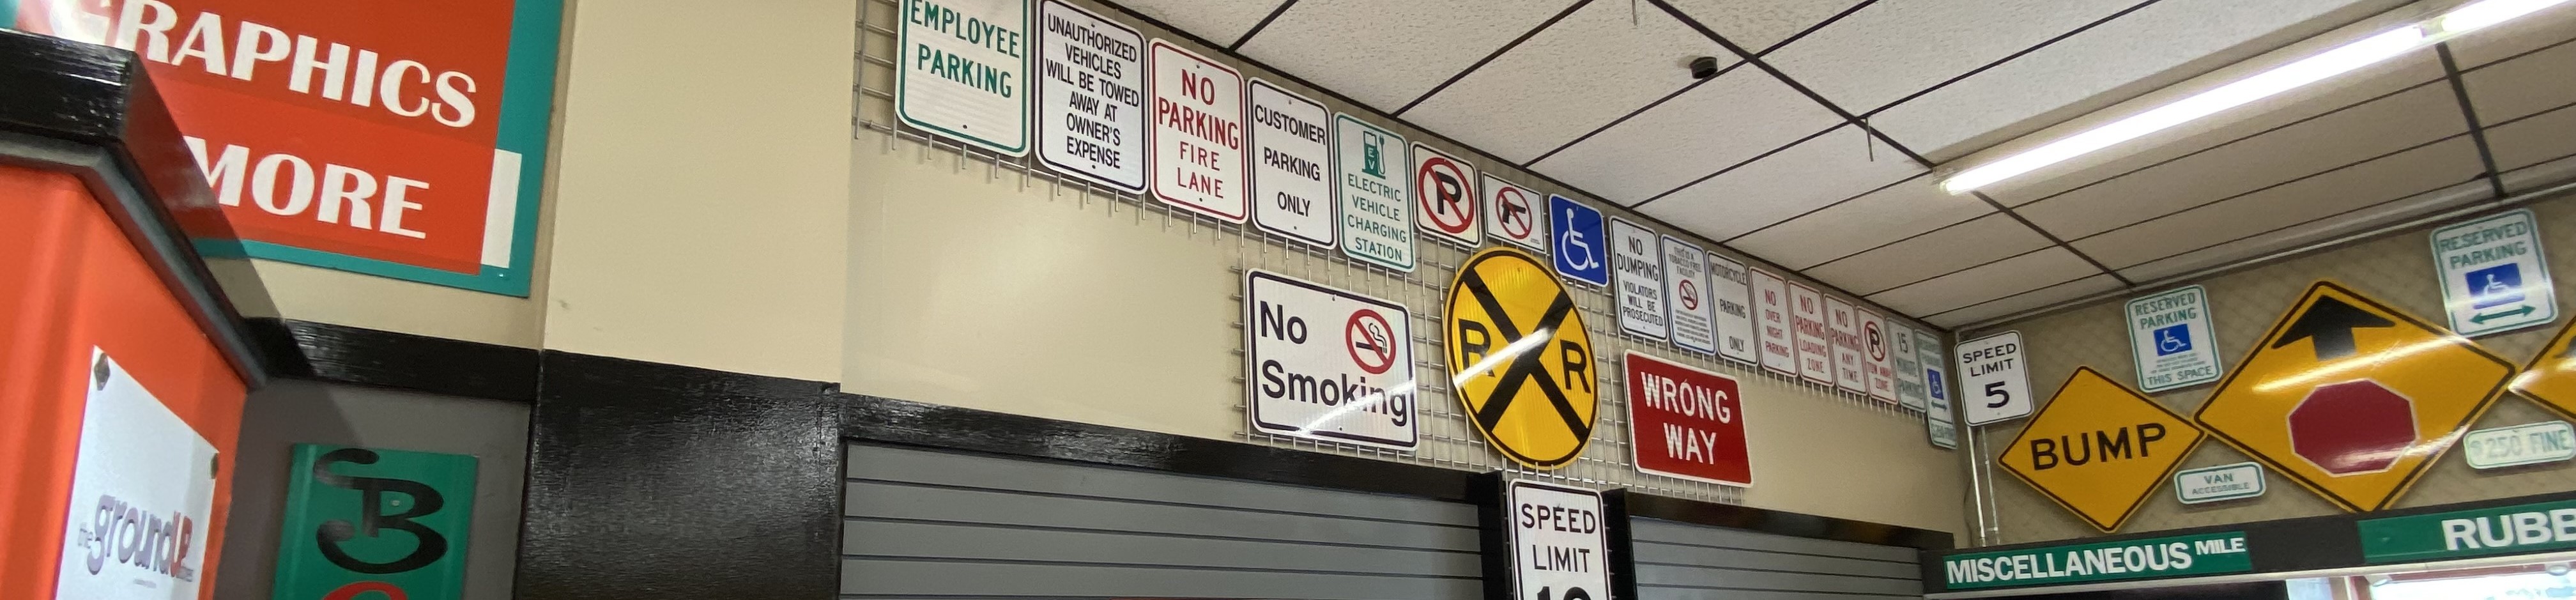  A variety of parking signs mounted on a wall